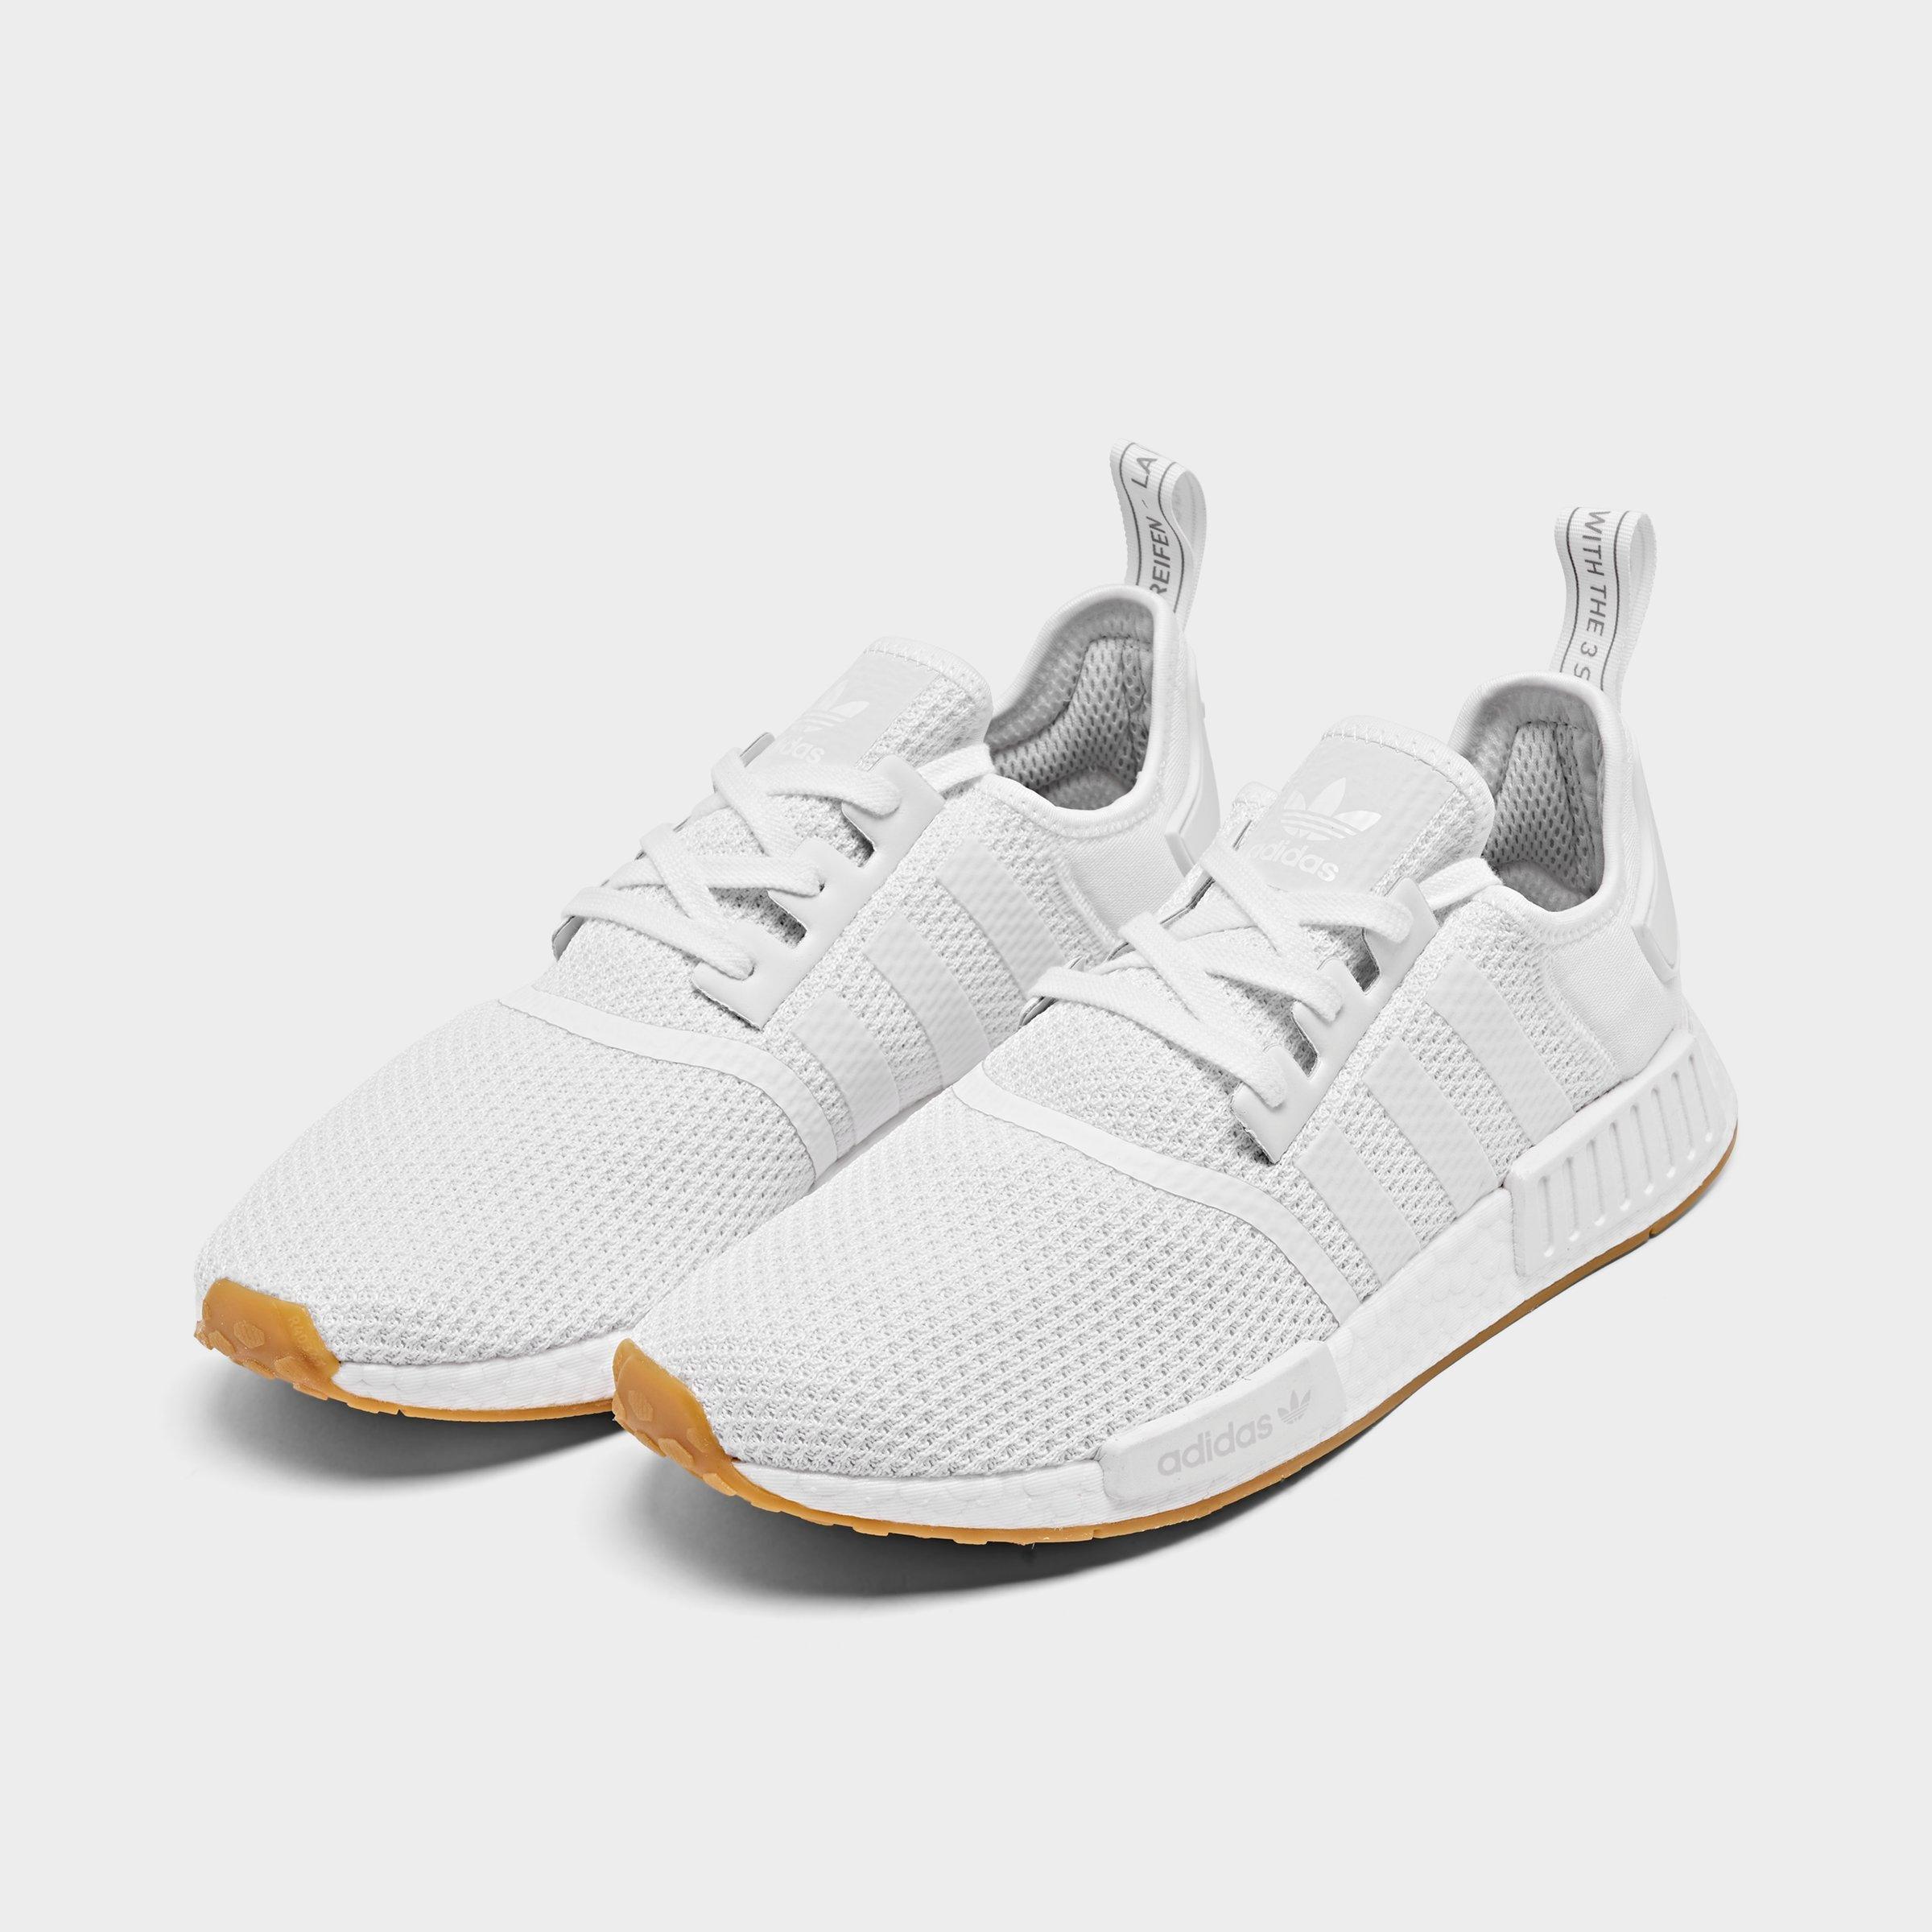 Adidas NMD R1 Talc Off White White Womens Girls Trainers All Sizes